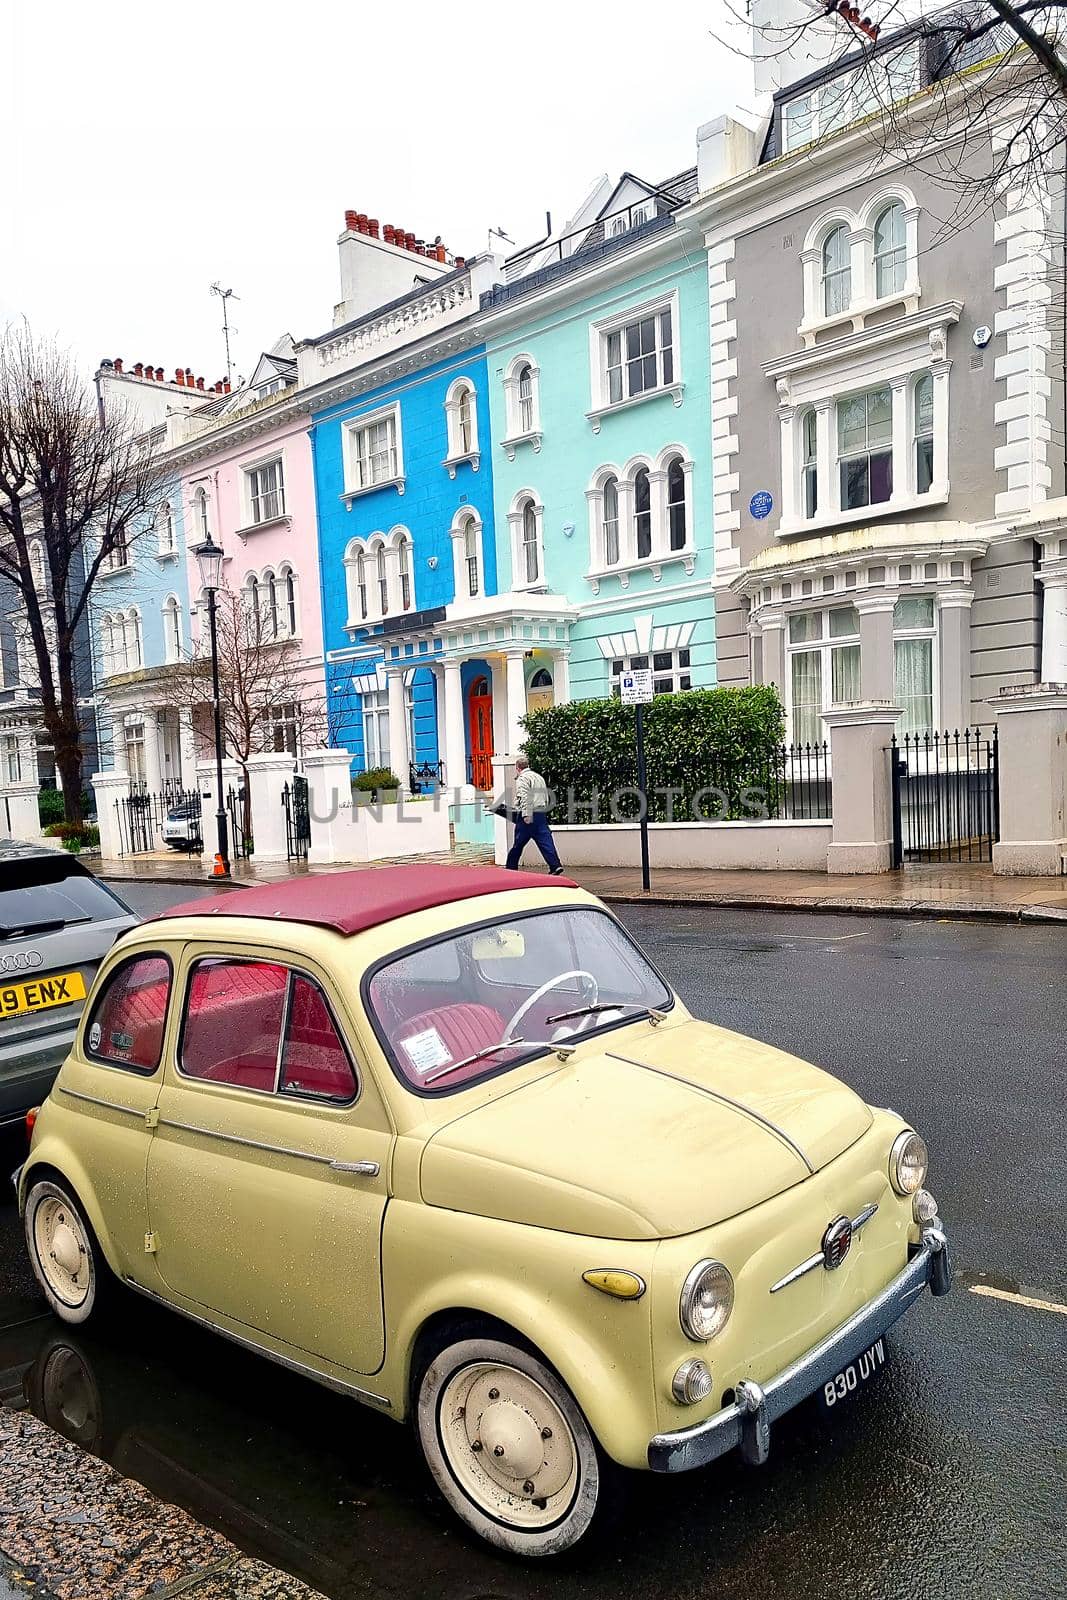 London, United Kingdom, February 7, 2022: beautiful small old car on the streets of London